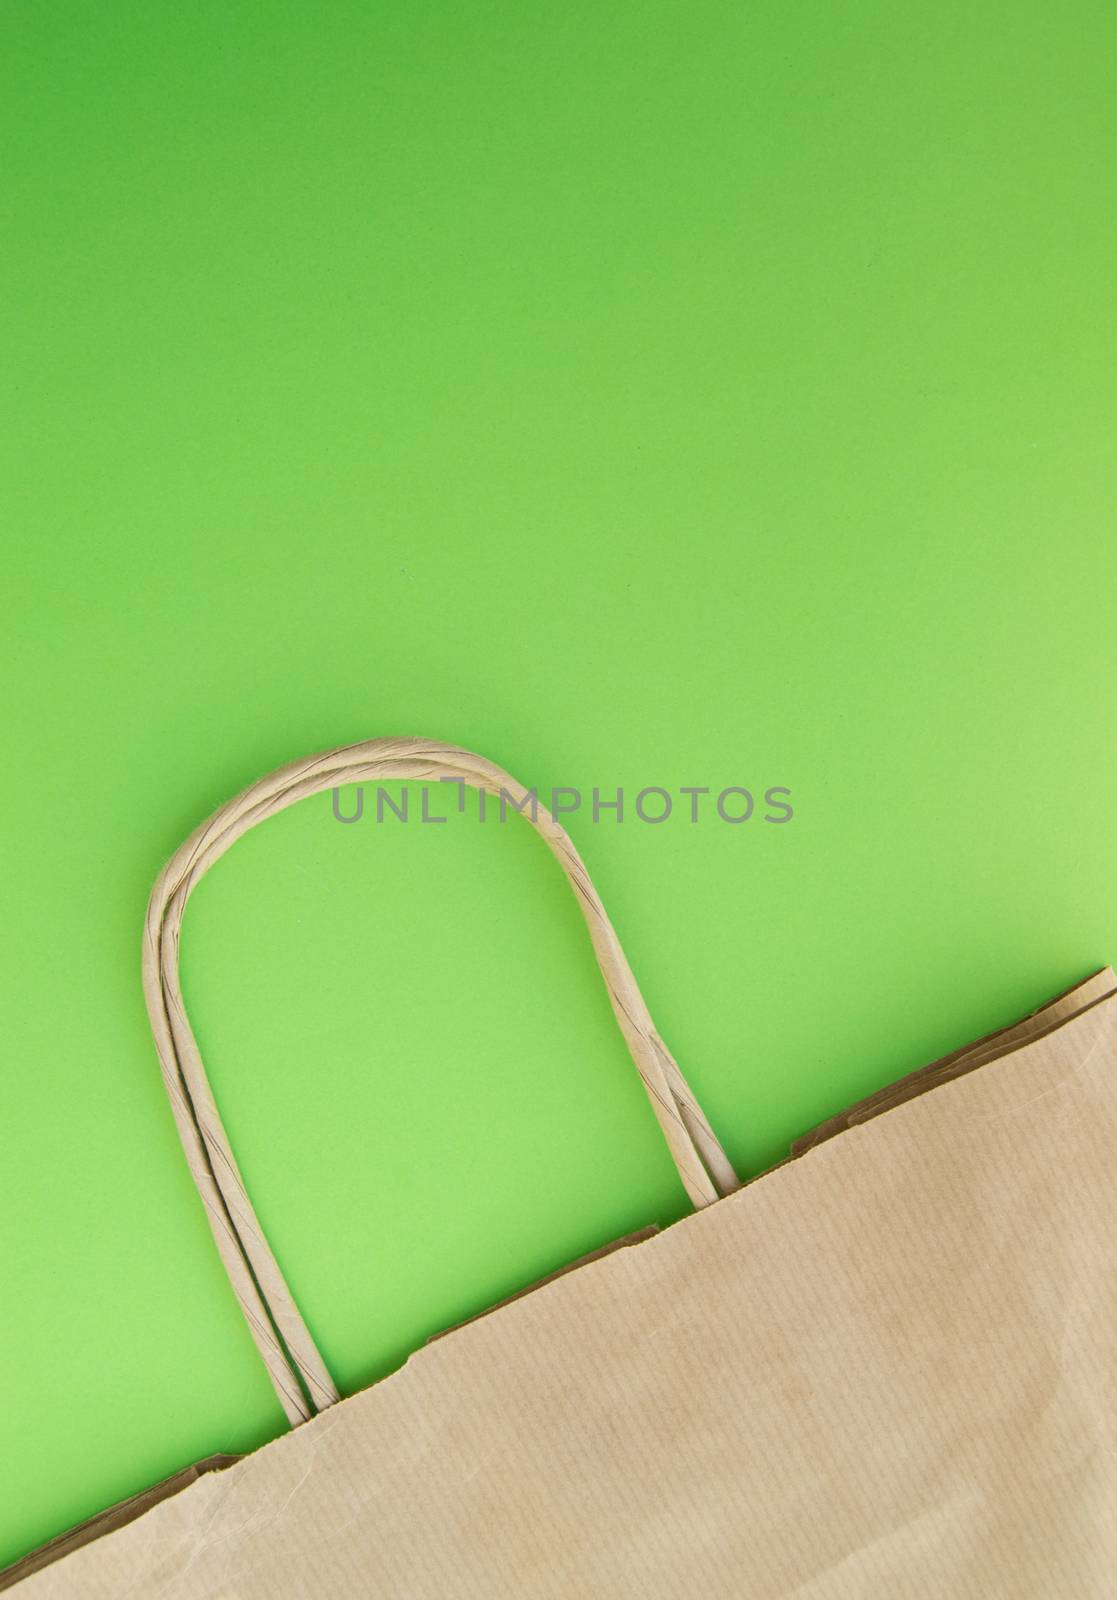 Concept of zero waste, reusable paper bag for shopping, free plastic, green background, top view, vertical photo by claire_lucia